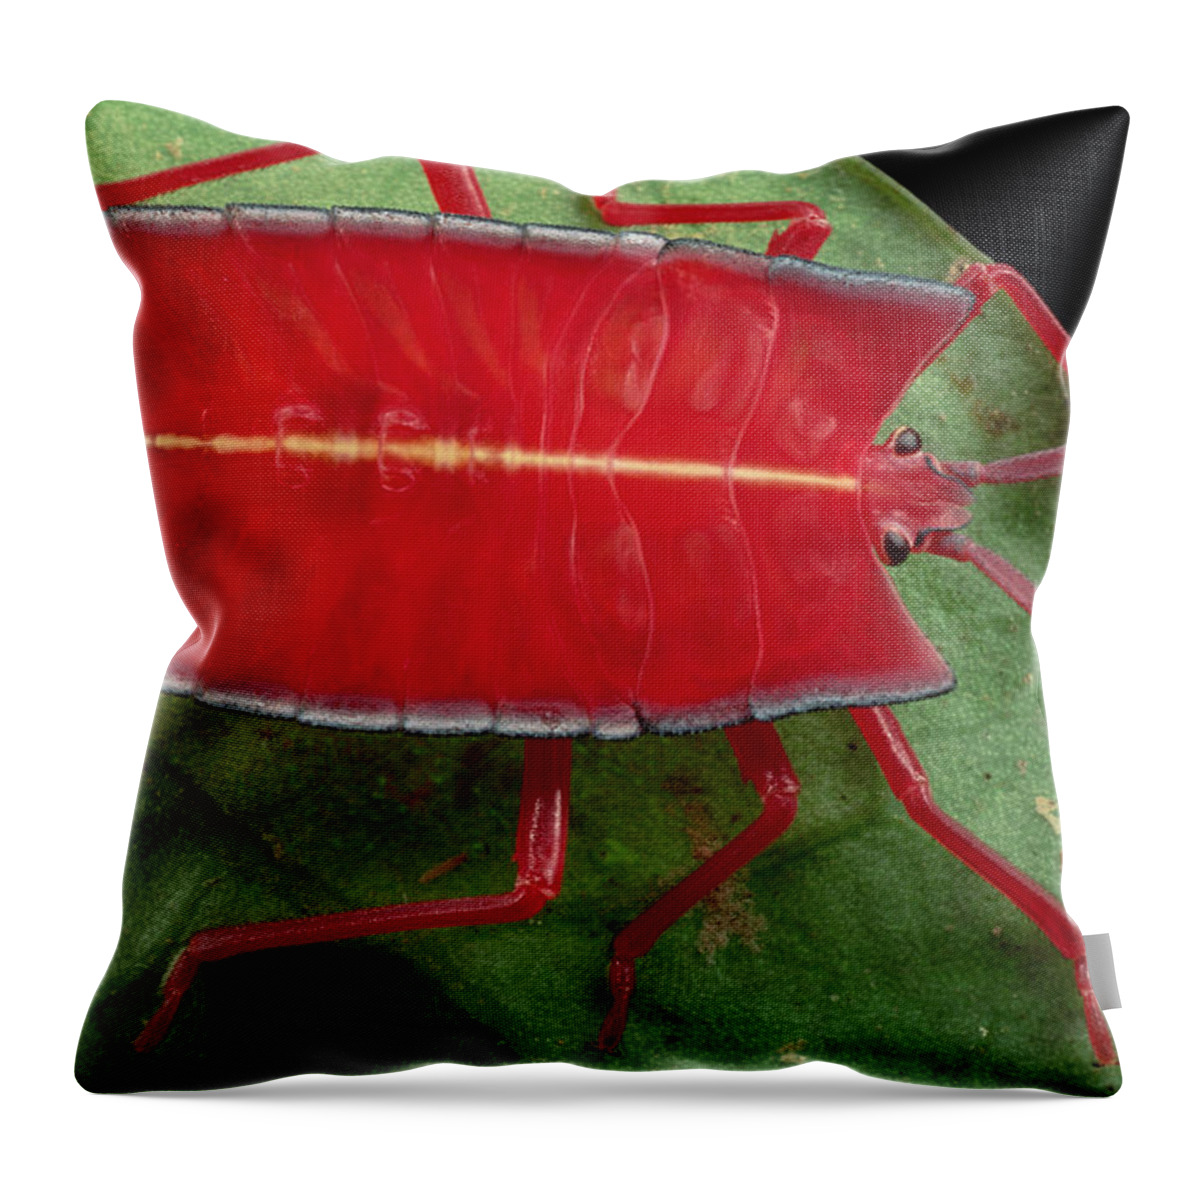 00750412 Throw Pillow featuring the photograph Red Stink Bug Brunei by Mark Moffett